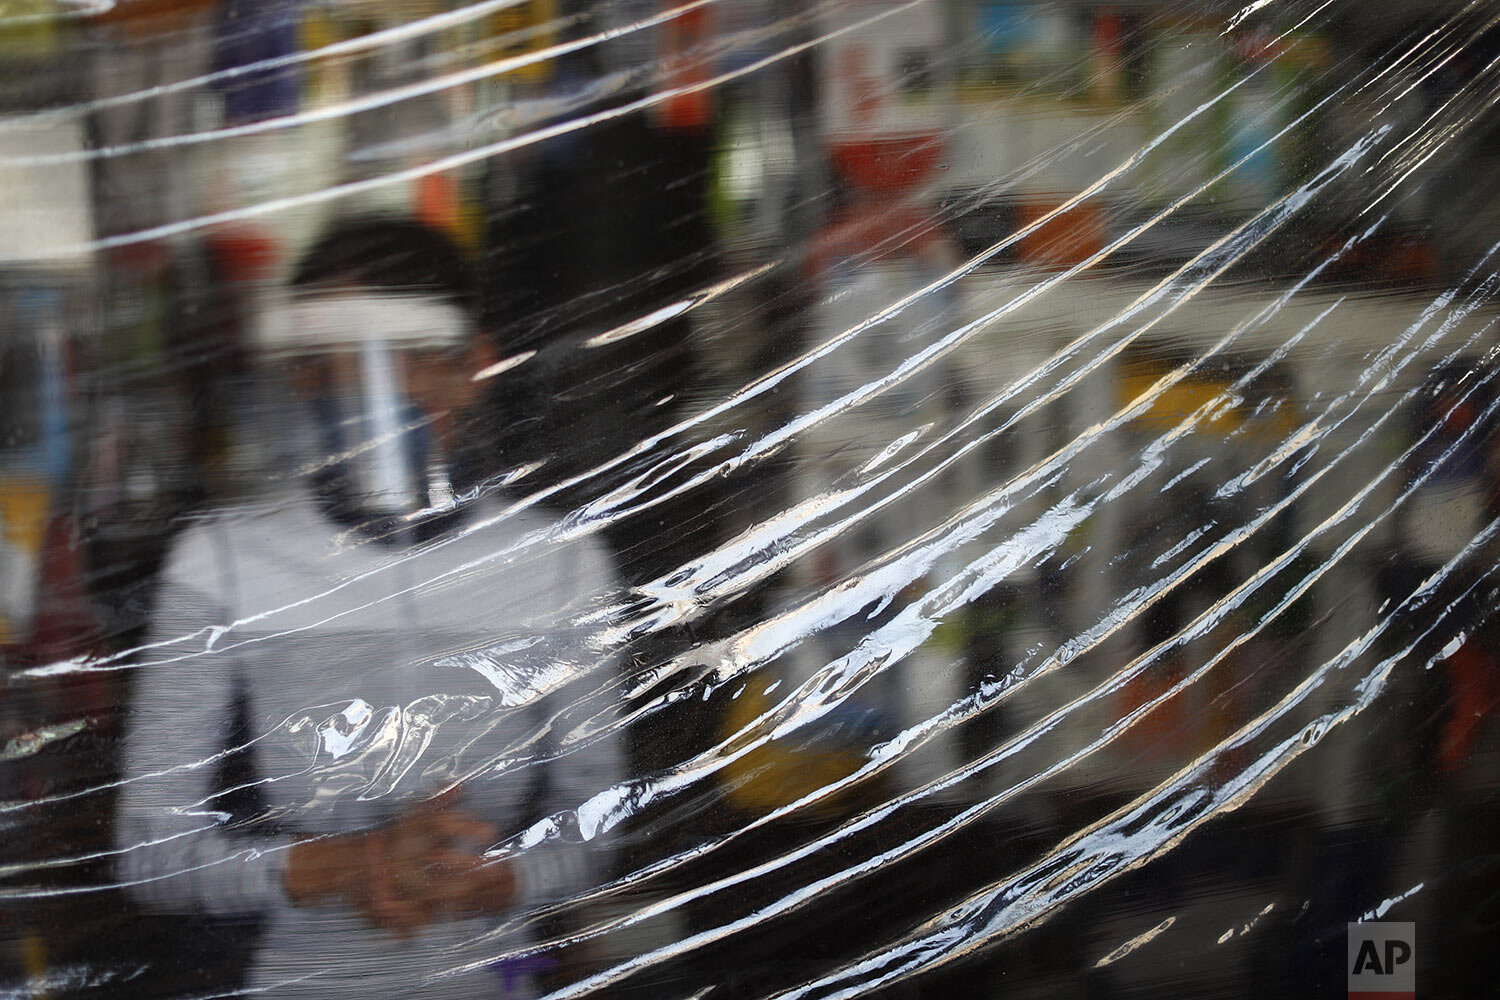  Carmen Castellanos, 54, wears a face mask and shield behind a protective sheet of plastic hanging over the counter, at El Foquito, a hardware and electric supply store she owns with her brother in Mexico City, Wednesday, April 15, 2020. The Castella